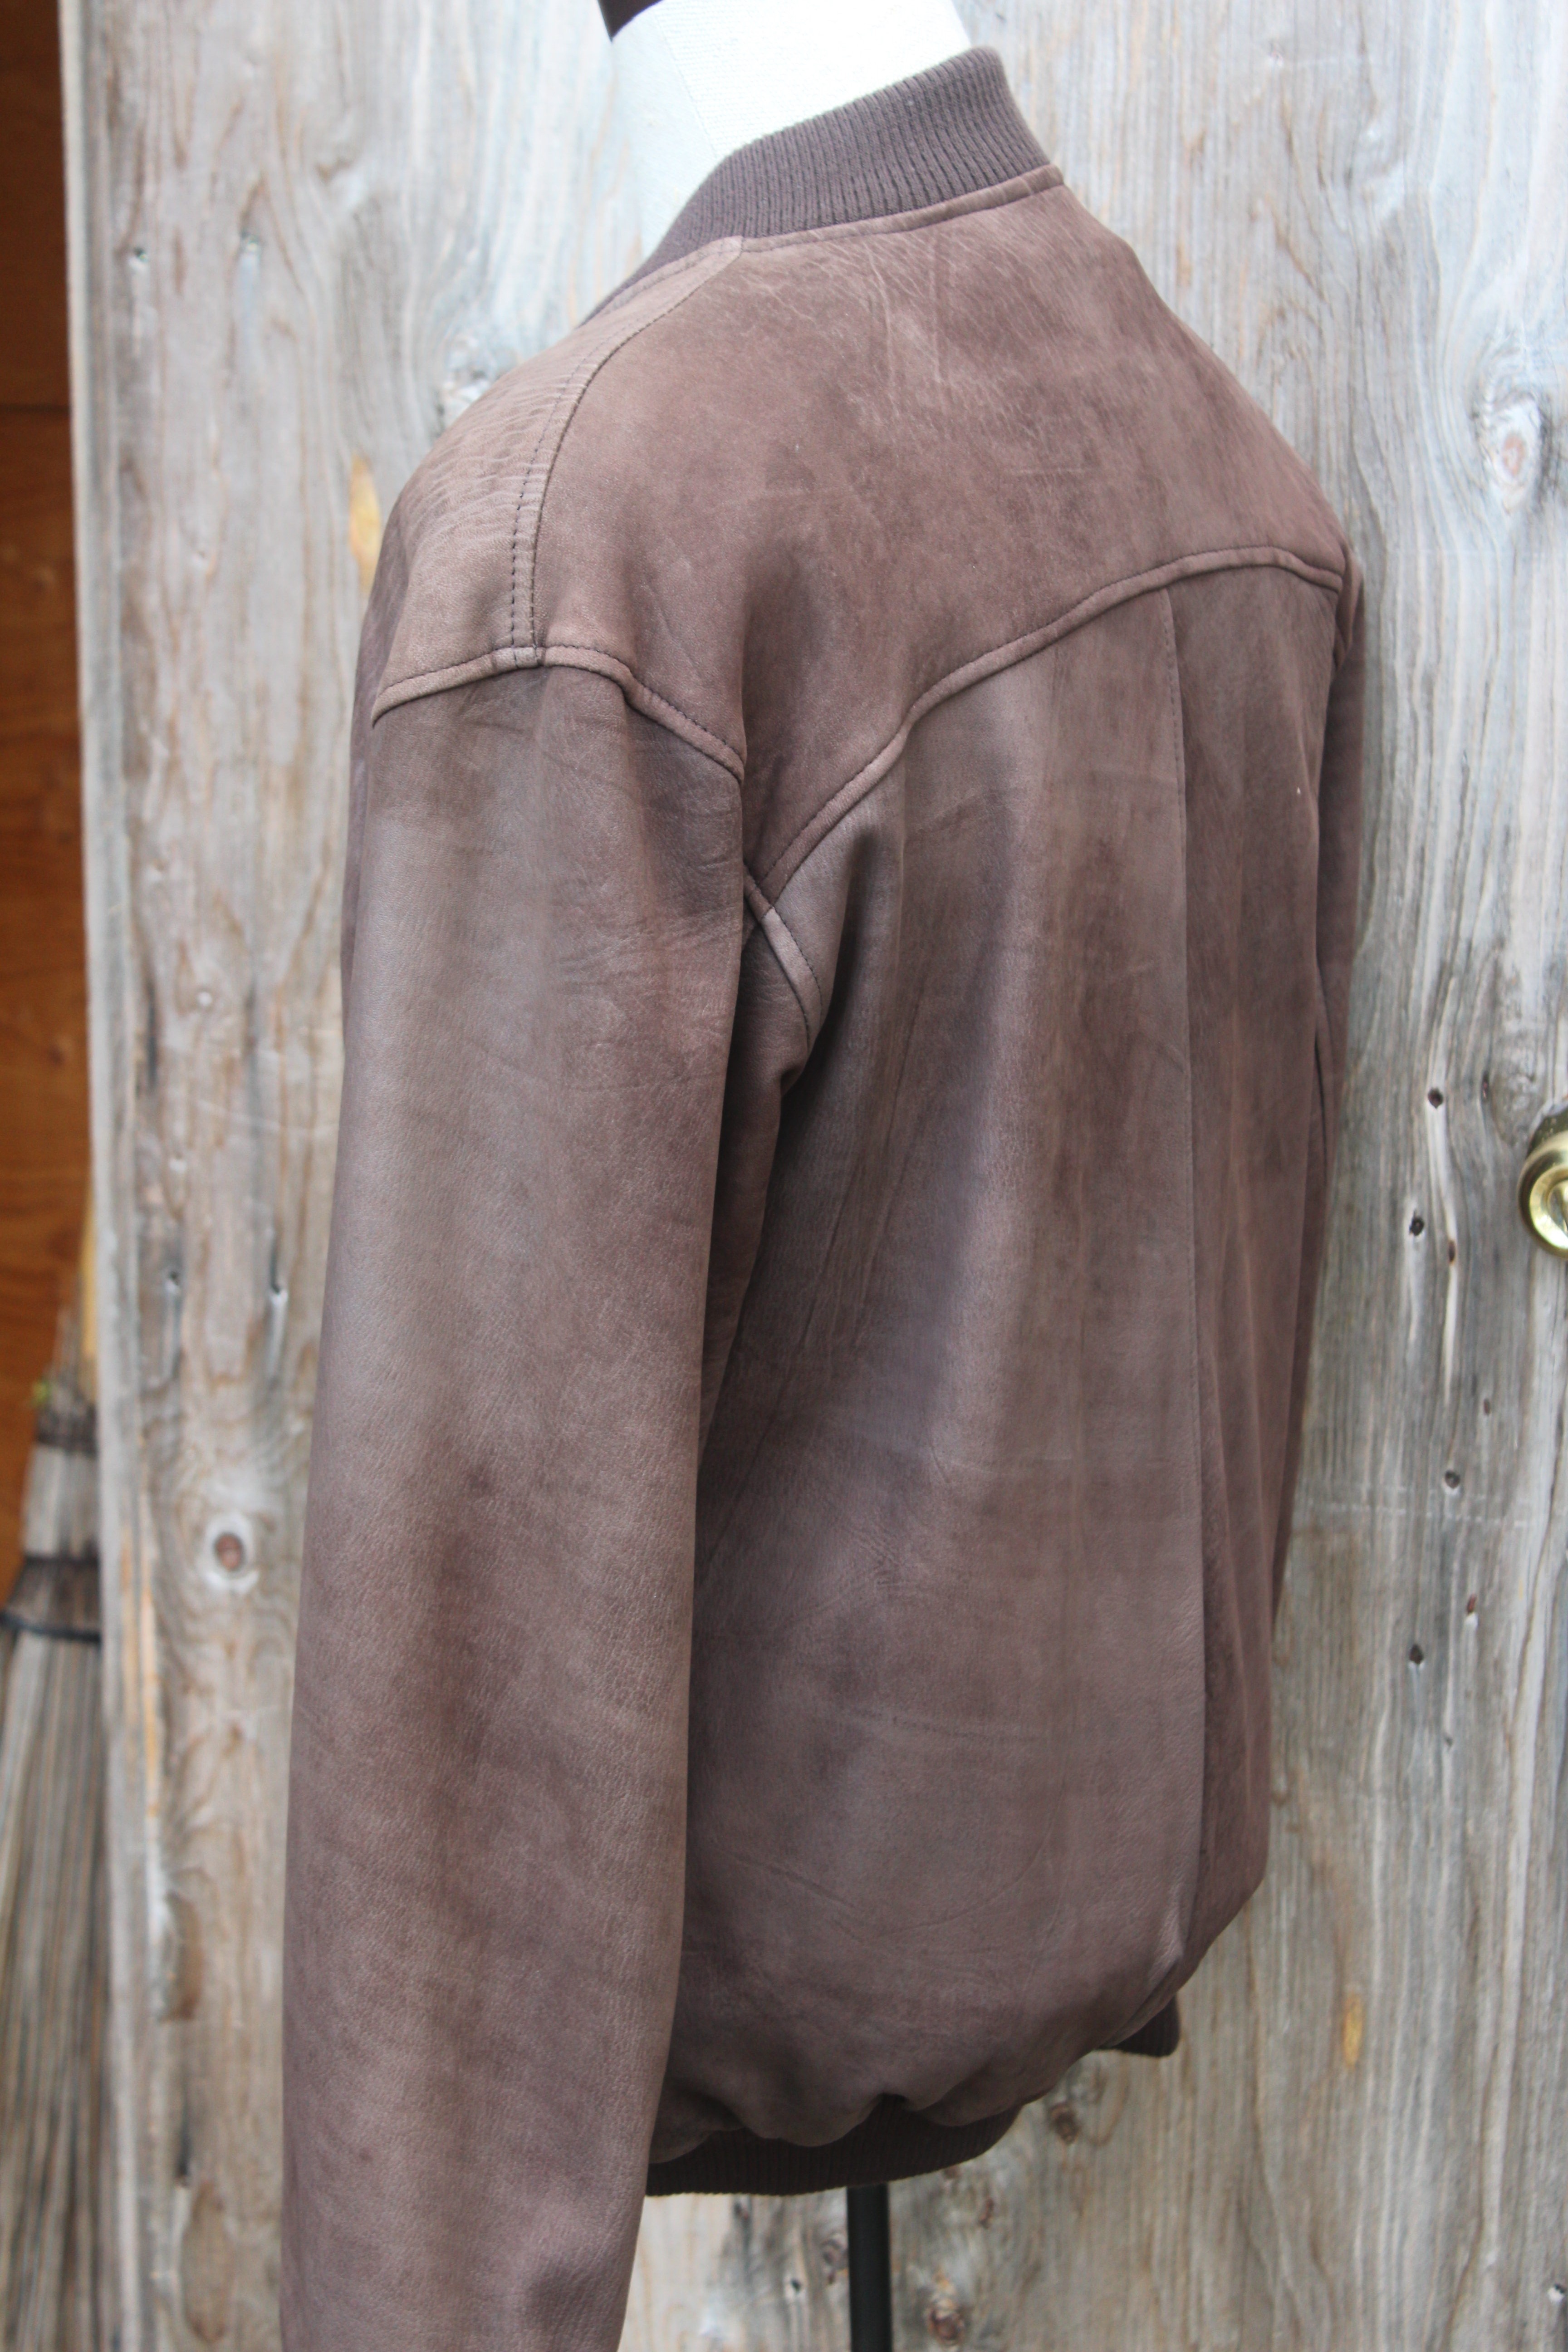 Mens Bomber in Naked Brown, (available in Classic Brown, Classic Black, Naked Black)- $225.00
Bainton's Tannery
Style #: 03